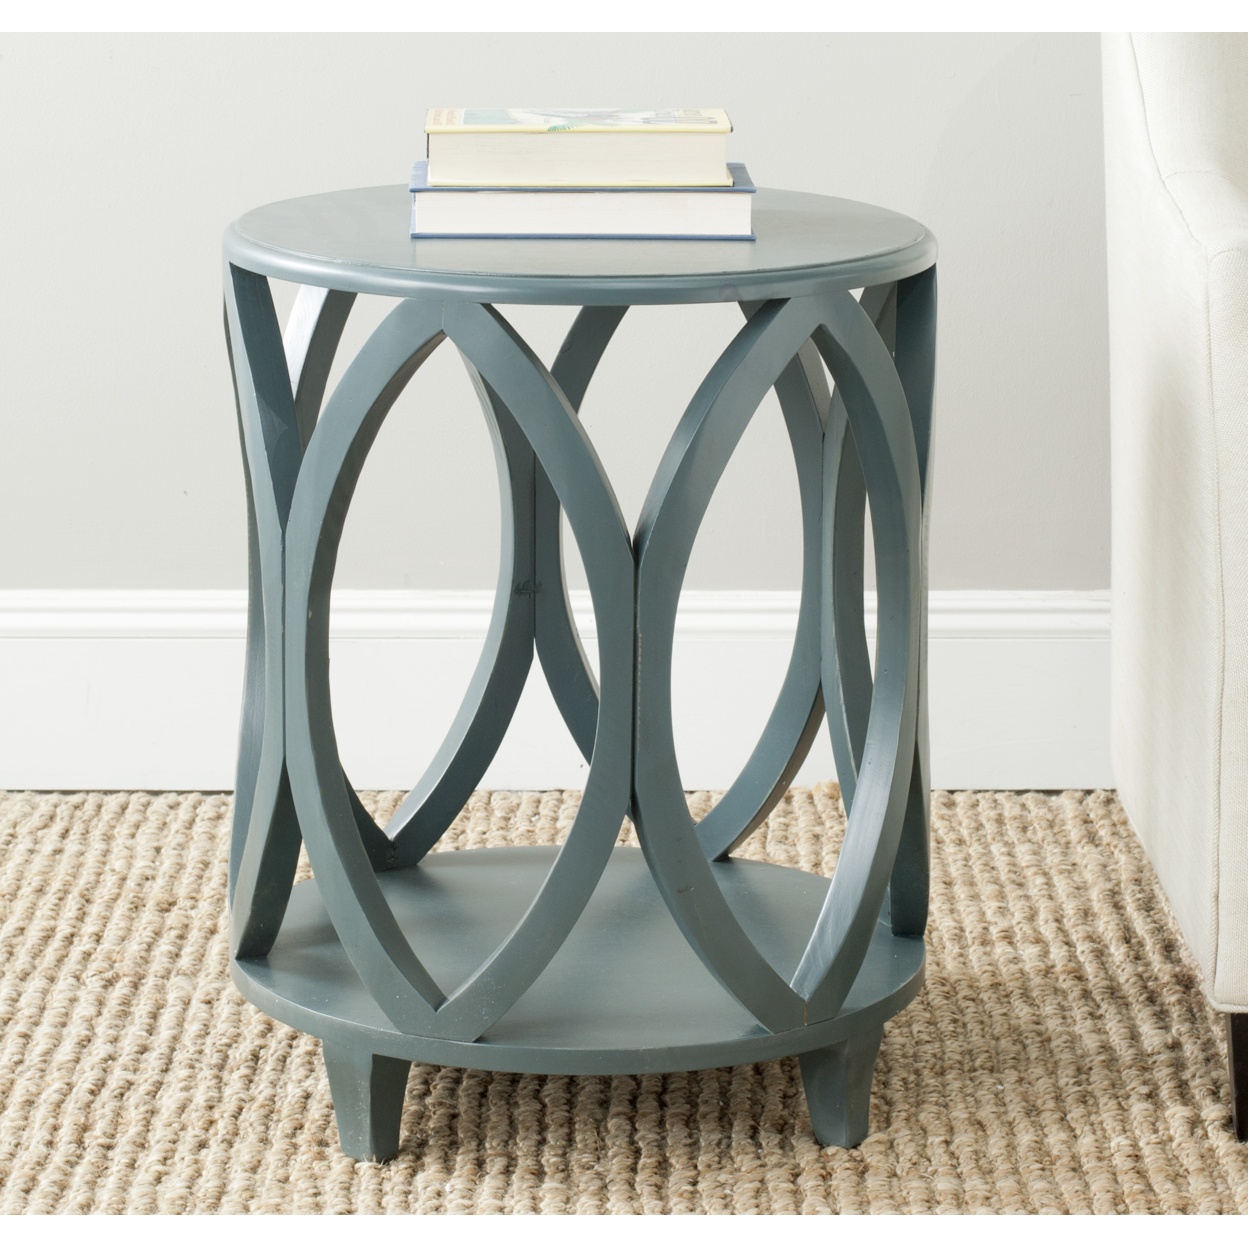 SAFAVIEH Janika Round Accent Table Teal